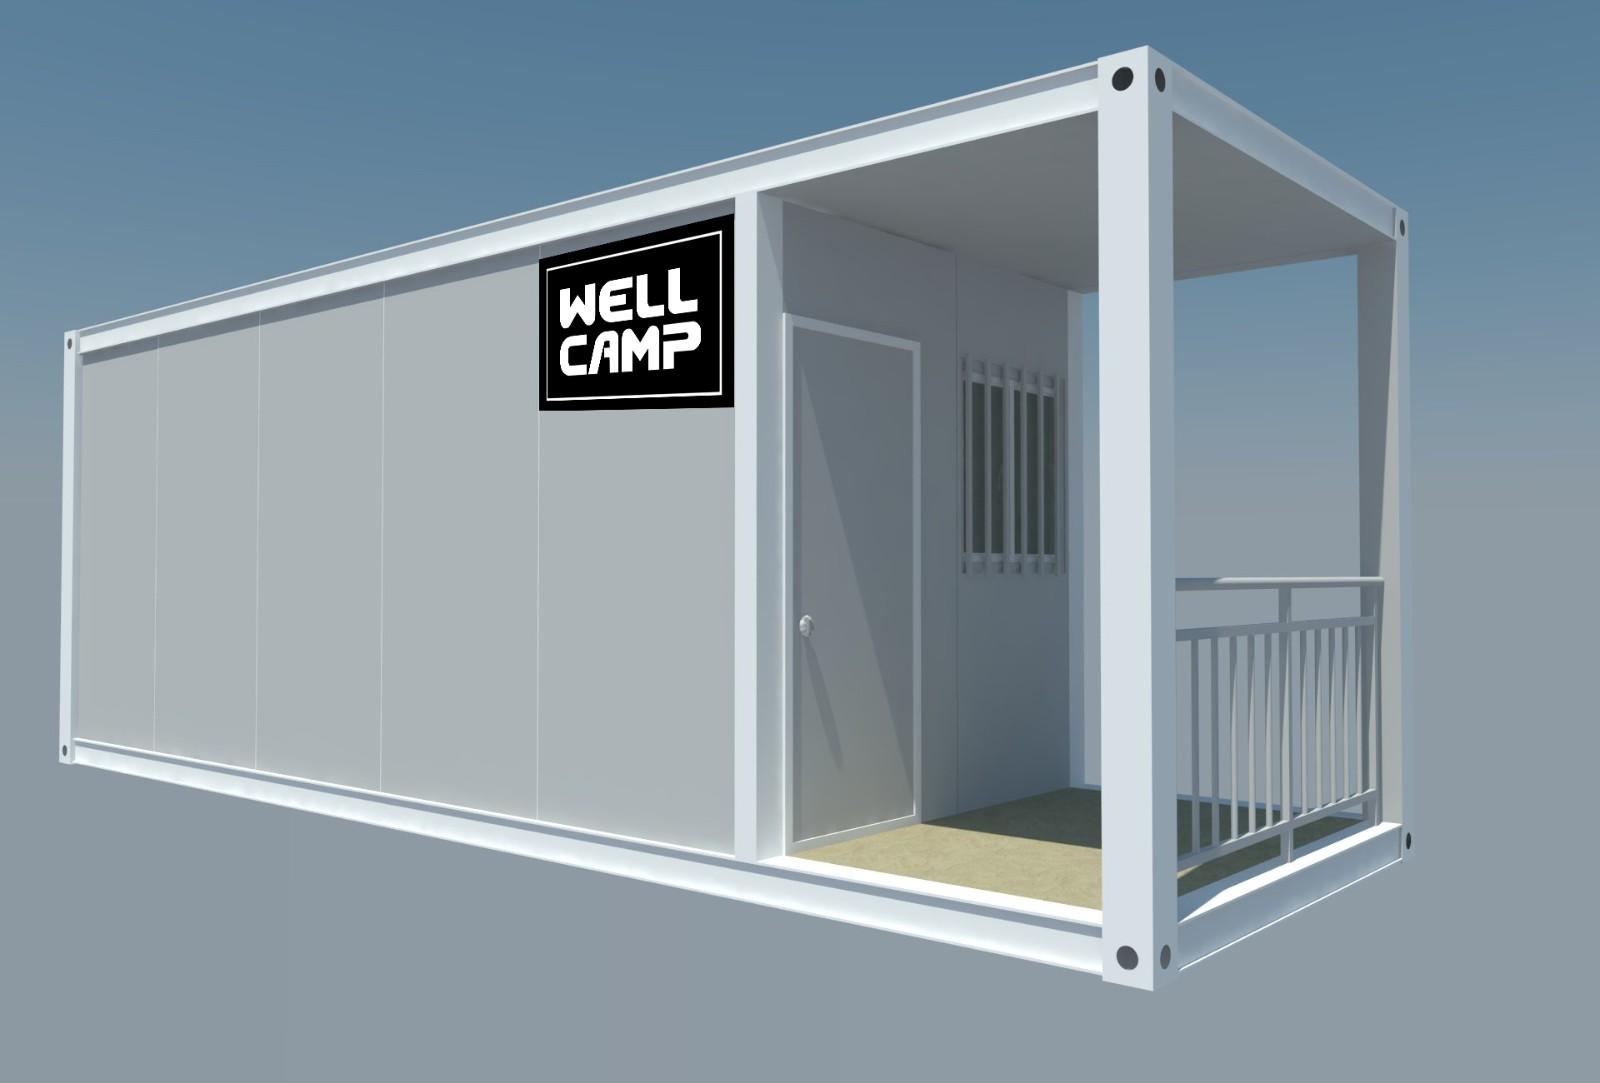 Hot glass flat pack 20 ft container easy WELLCAMP Brand